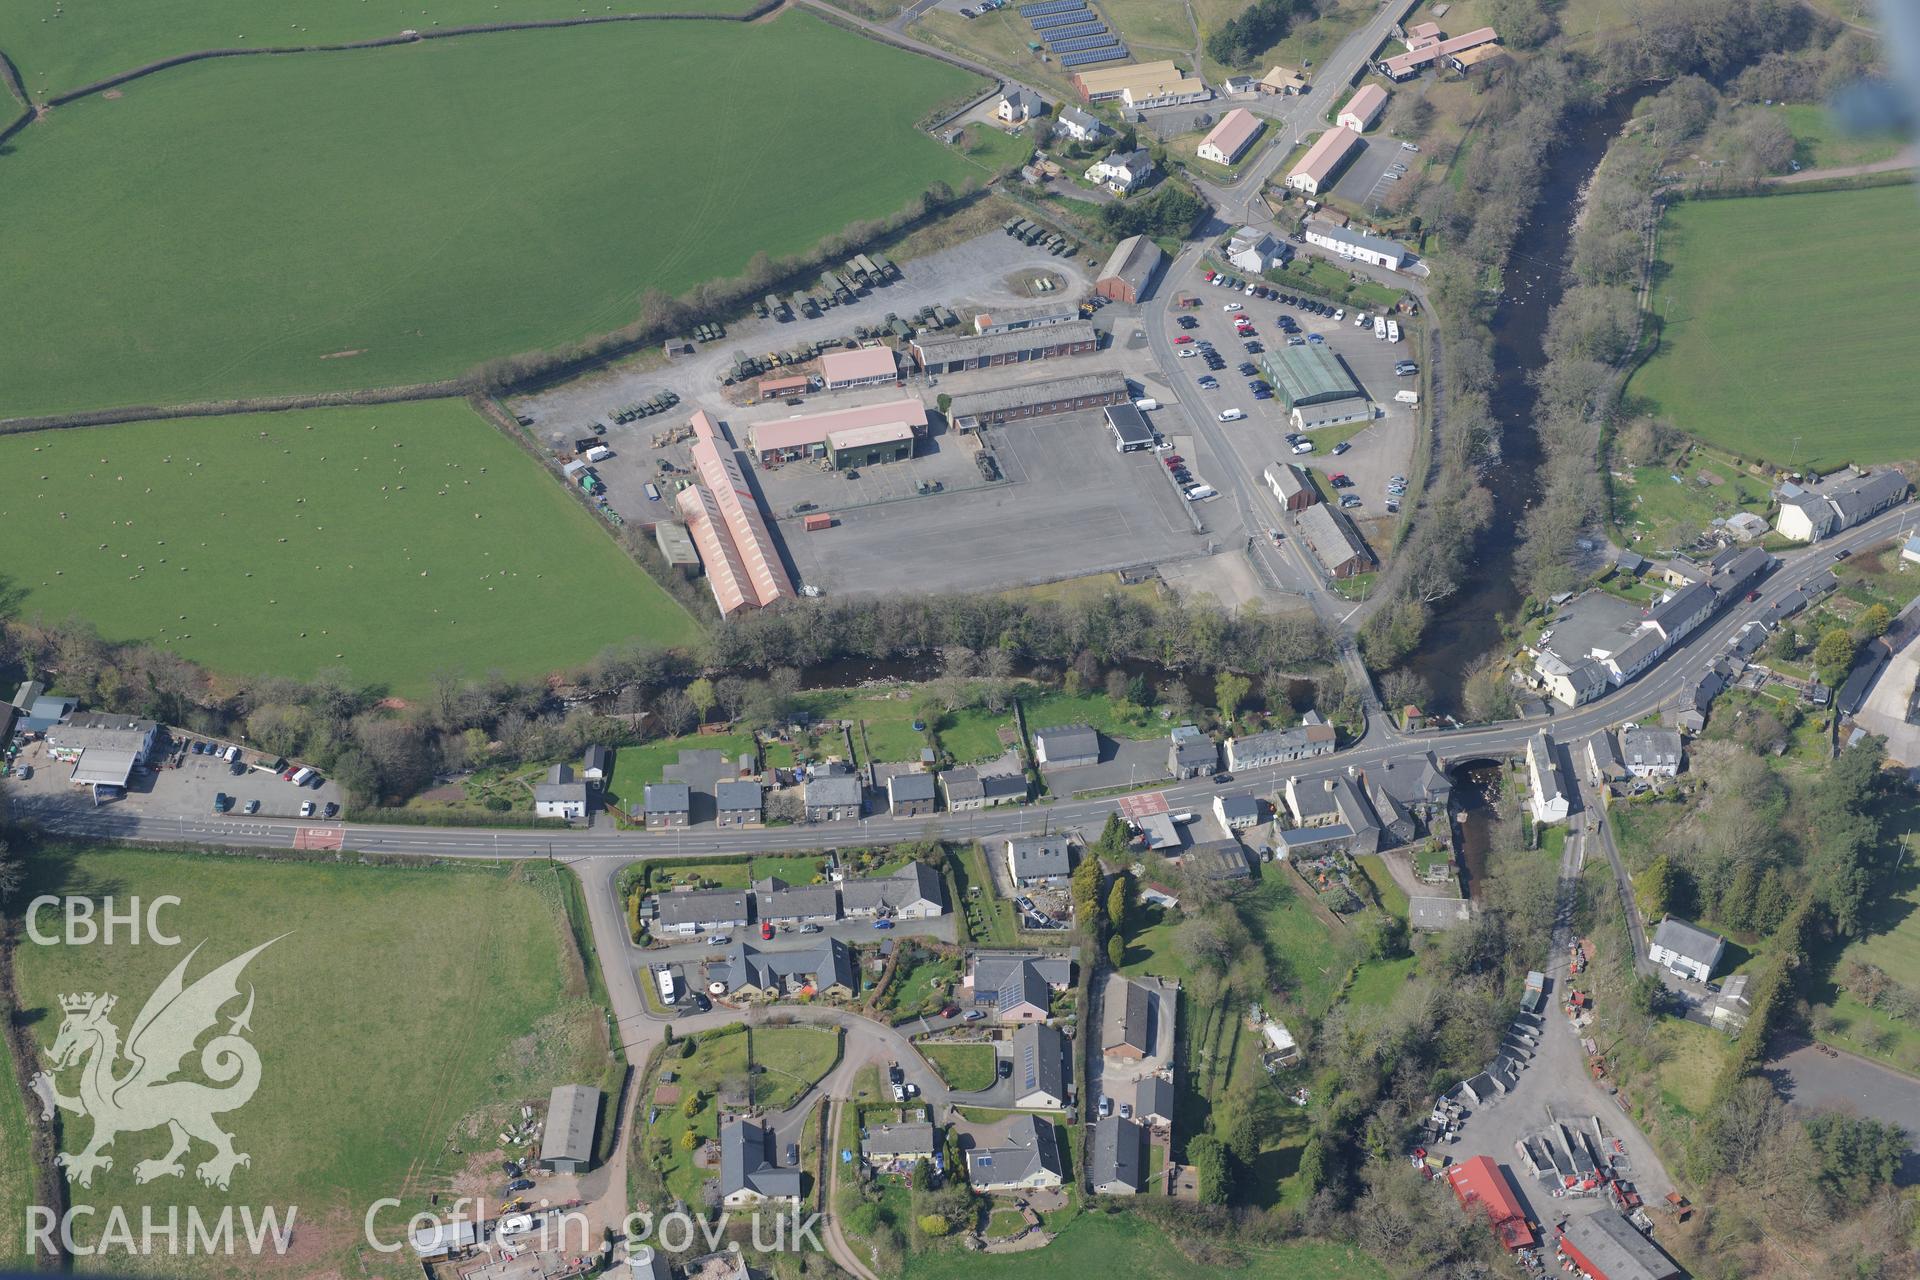 Sennybridge Village including the castle, Sion Baptist Chapel, Sennybridge Camp and coal yard. Oblique aerial photograph taken during the Royal Commission's programme of archaeological aerial reconnaissance by Toby Driver on 21st April 2015